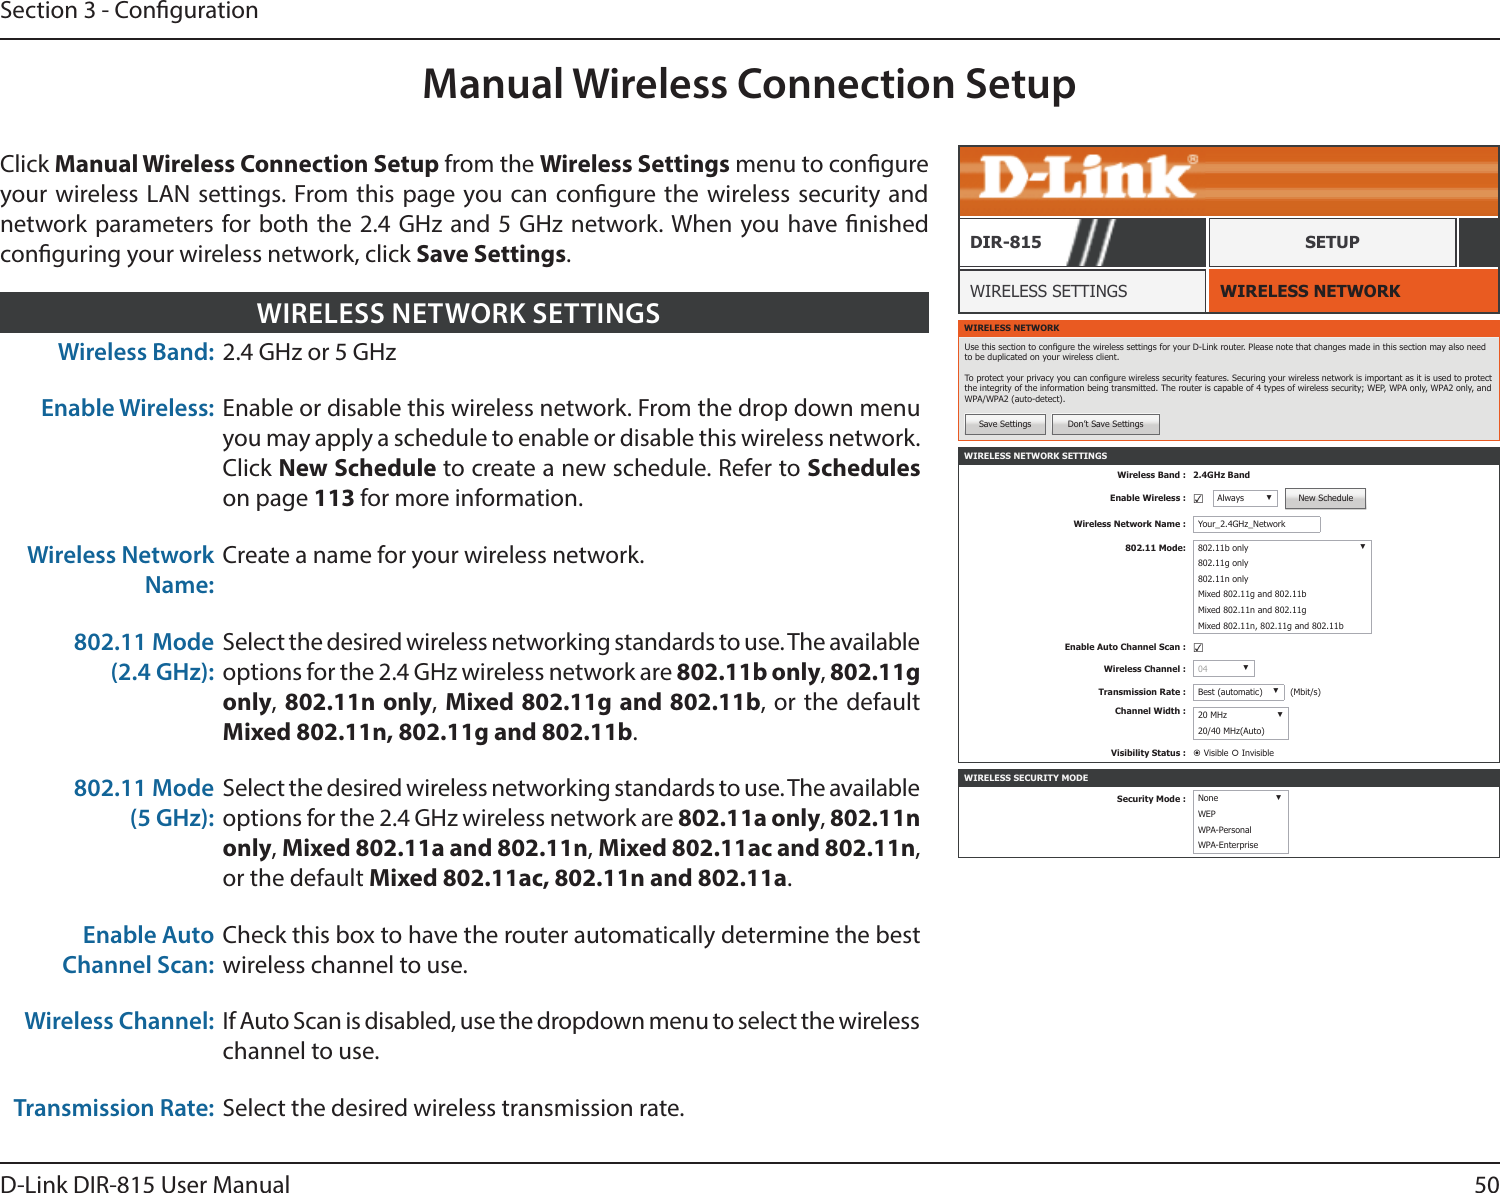 50D-Link DIR-815 User ManualSection 3 - CongurationManual Wireless Connection SetupWIRELESS NETWORK SETTINGSWireless Band : 2.4GHz BandEnable Wireless : ☑Always ▼New ScheduleWireless Network Name : Your_2.4GHz_Network802.11 Mode: 802.11b only ▼802.11g only802.11n onlyMixed 802.11g and 802.11bMixed 802.11n and 802.11gMixed 802.11n, 802.11g and 802.11bEnable Auto Channel Scan : ☑Wireless Channel : 04 ▼Transmission Rate : Best (automatic) ▼(Mbit/s)Channel Width : 20 MHz ▼20/40 MHz(Auto)Visibility Status :  Visible  InvisibleWIRELESS NETWORKWIRELESS SETTINGSDIR-815 SETUPWIRELESS NETWORKUse this section to congure the wireless settings for your D-Link router. Please note that changes made in this section may also need to be duplicated on your wireless client.To protect your privacy you can congure wireless security features. Securing your wireless network is important as it is used to protect the integrity of the information being transmitted. The router is capable of 4 types of wireless security; WEP, WPA only, WPA2 only, and WPA/WPA2 (auto-detect).Save Settings Don’t Save SettingsClick Manual Wireless Connection Setup from the Wireless Settings menu to congure your wireless LAN settings. From this page you can congure the wireless security and network parameters for both the 2.4 GHz and 5 GHz network. When you have nished conguring your wireless network, click Save Settings.Wireless Band: 2.4 GHz or 5 GHzEnable Wireless: Enable or disable this wireless network. From the drop down menu you may apply a schedule to enable or disable this wireless network. Click New Schedule to create a new schedule. Refer to Schedules on page 113 for more information.Wireless Network Name:Create a name for your wireless network.802.11 Mode (2.4 GHz):Select the desired wireless networking standards to use. The available options for the 2.4 GHz wireless network are 802.11b only, 802.11g only, 802.11n only,  Mixed 802.11g and 802.11b, or the default Mixed 802.11n, 802.11g and 802.11b.802.11 Mode (5 GHz):Select the desired wireless networking standards to use. The available options for the 2.4 GHz wireless network are 802.11a only, 802.11n only, Mixed 802.11a and 802.11n, Mixed 802.11ac and 802.11n, or the default Mixed 802.11ac, 802.11n and 802.11a.Enable Auto Channel Scan:Check this box to have the router automatically determine the best wireless channel to use.Wireless Channel: If Auto Scan is disabled, use the dropdown menu to select the wireless channel to use.Transmission Rate: Select the desired wireless transmission rate.WIRELESS NETWORK SETTINGSWIRELESS SECURITY MODESecurity Mode : None ▼WEPWPA-PersonalWPA-Enterprise